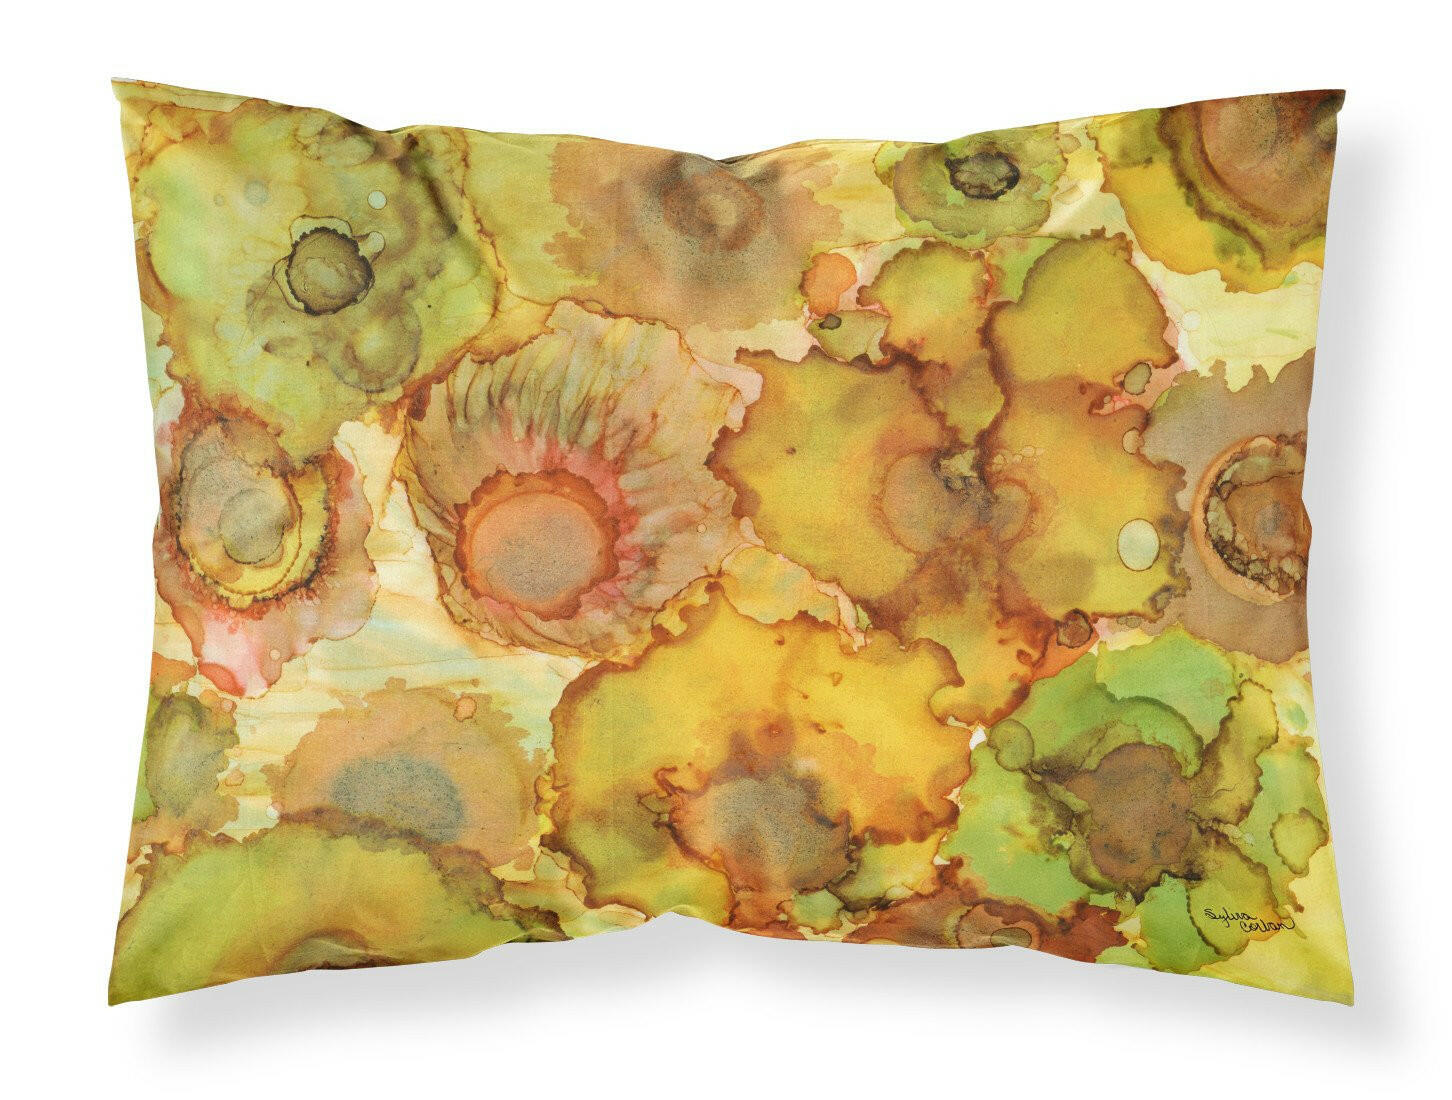 Abstract Flowers in Yellows and Oranges Fabric Standard Pillowcase 8986PILLOWCASE by Caroline's Treasures